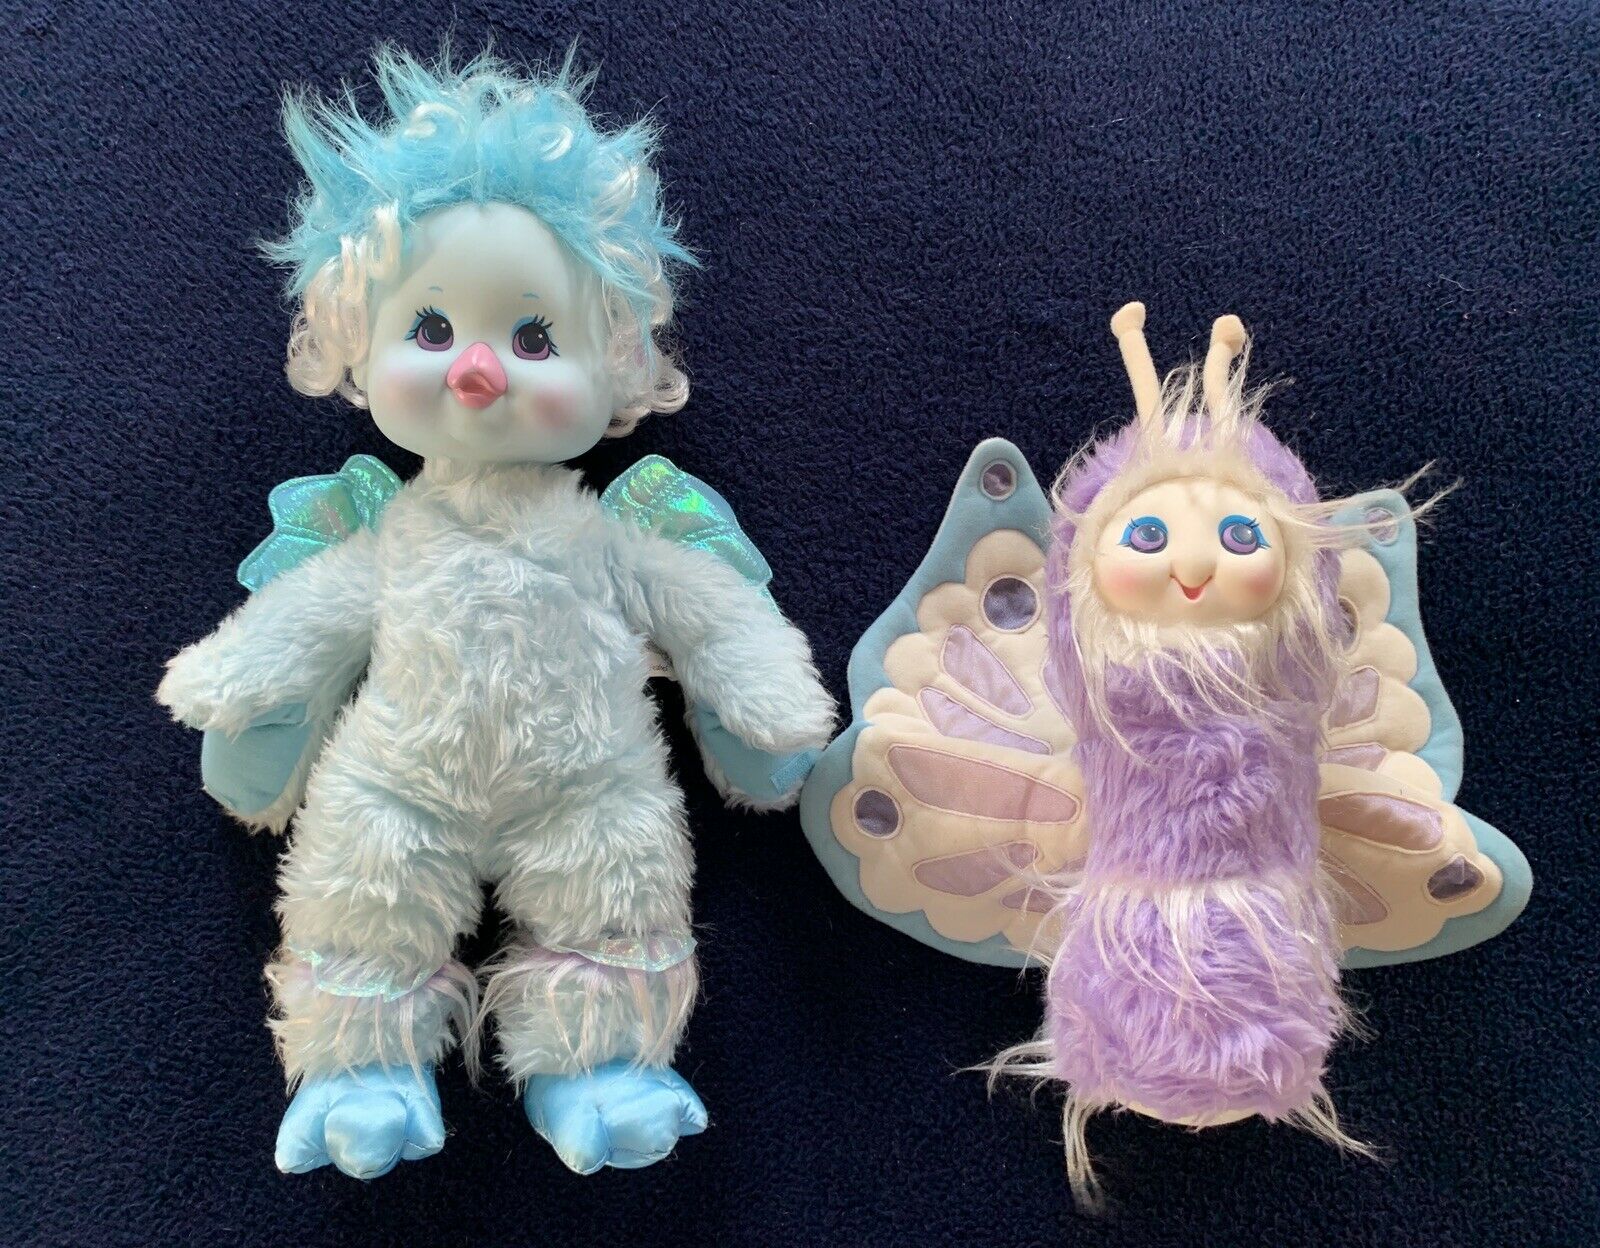 WONDER WHIMS Rare VINTAGE 1985 Feather & Butterly Boo Doll Plush set HTF CLEAN!